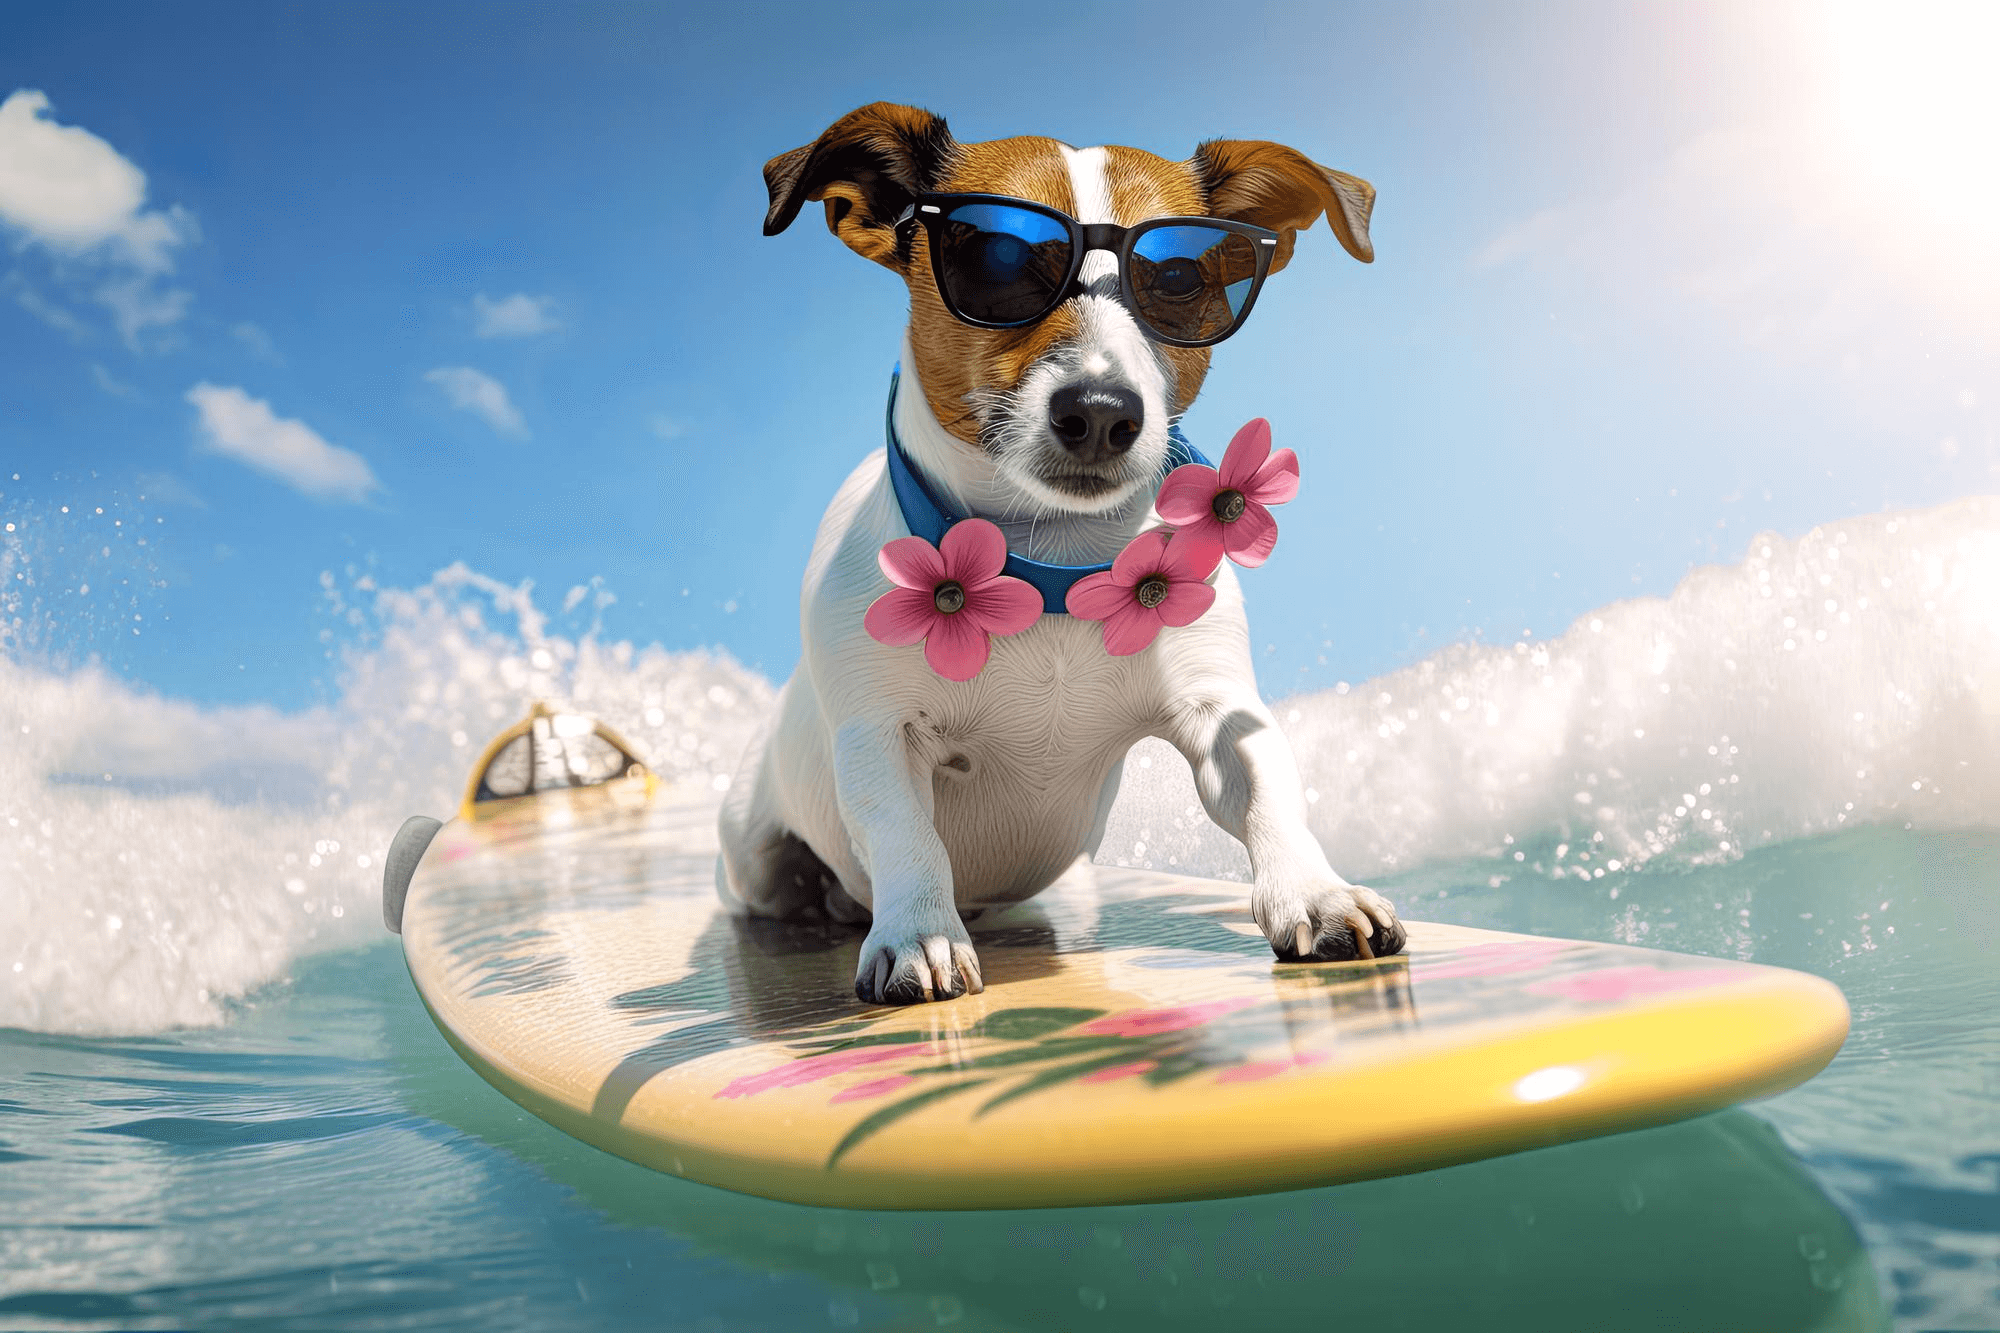 image of a dog surfing